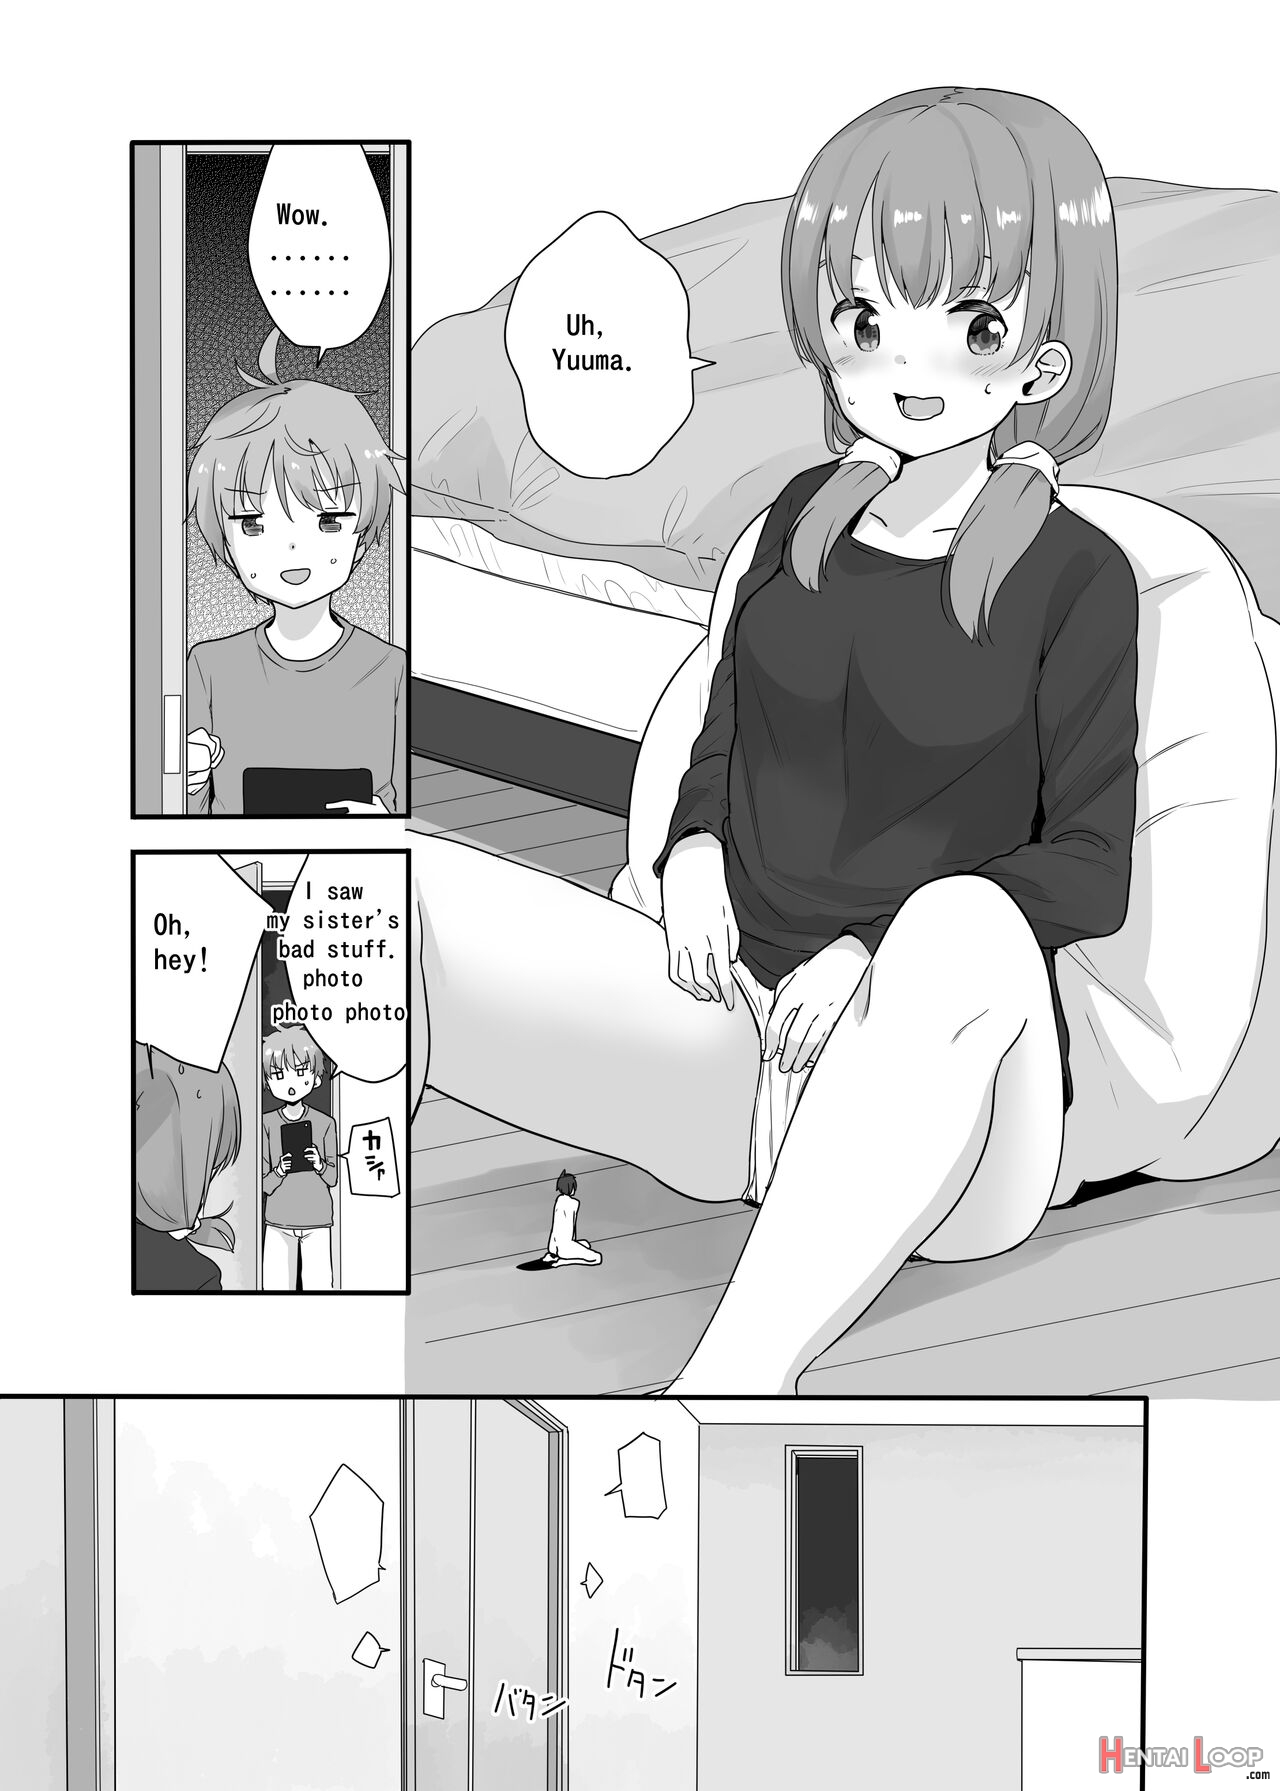 Little Sister With Grande Everyday 3 page 4